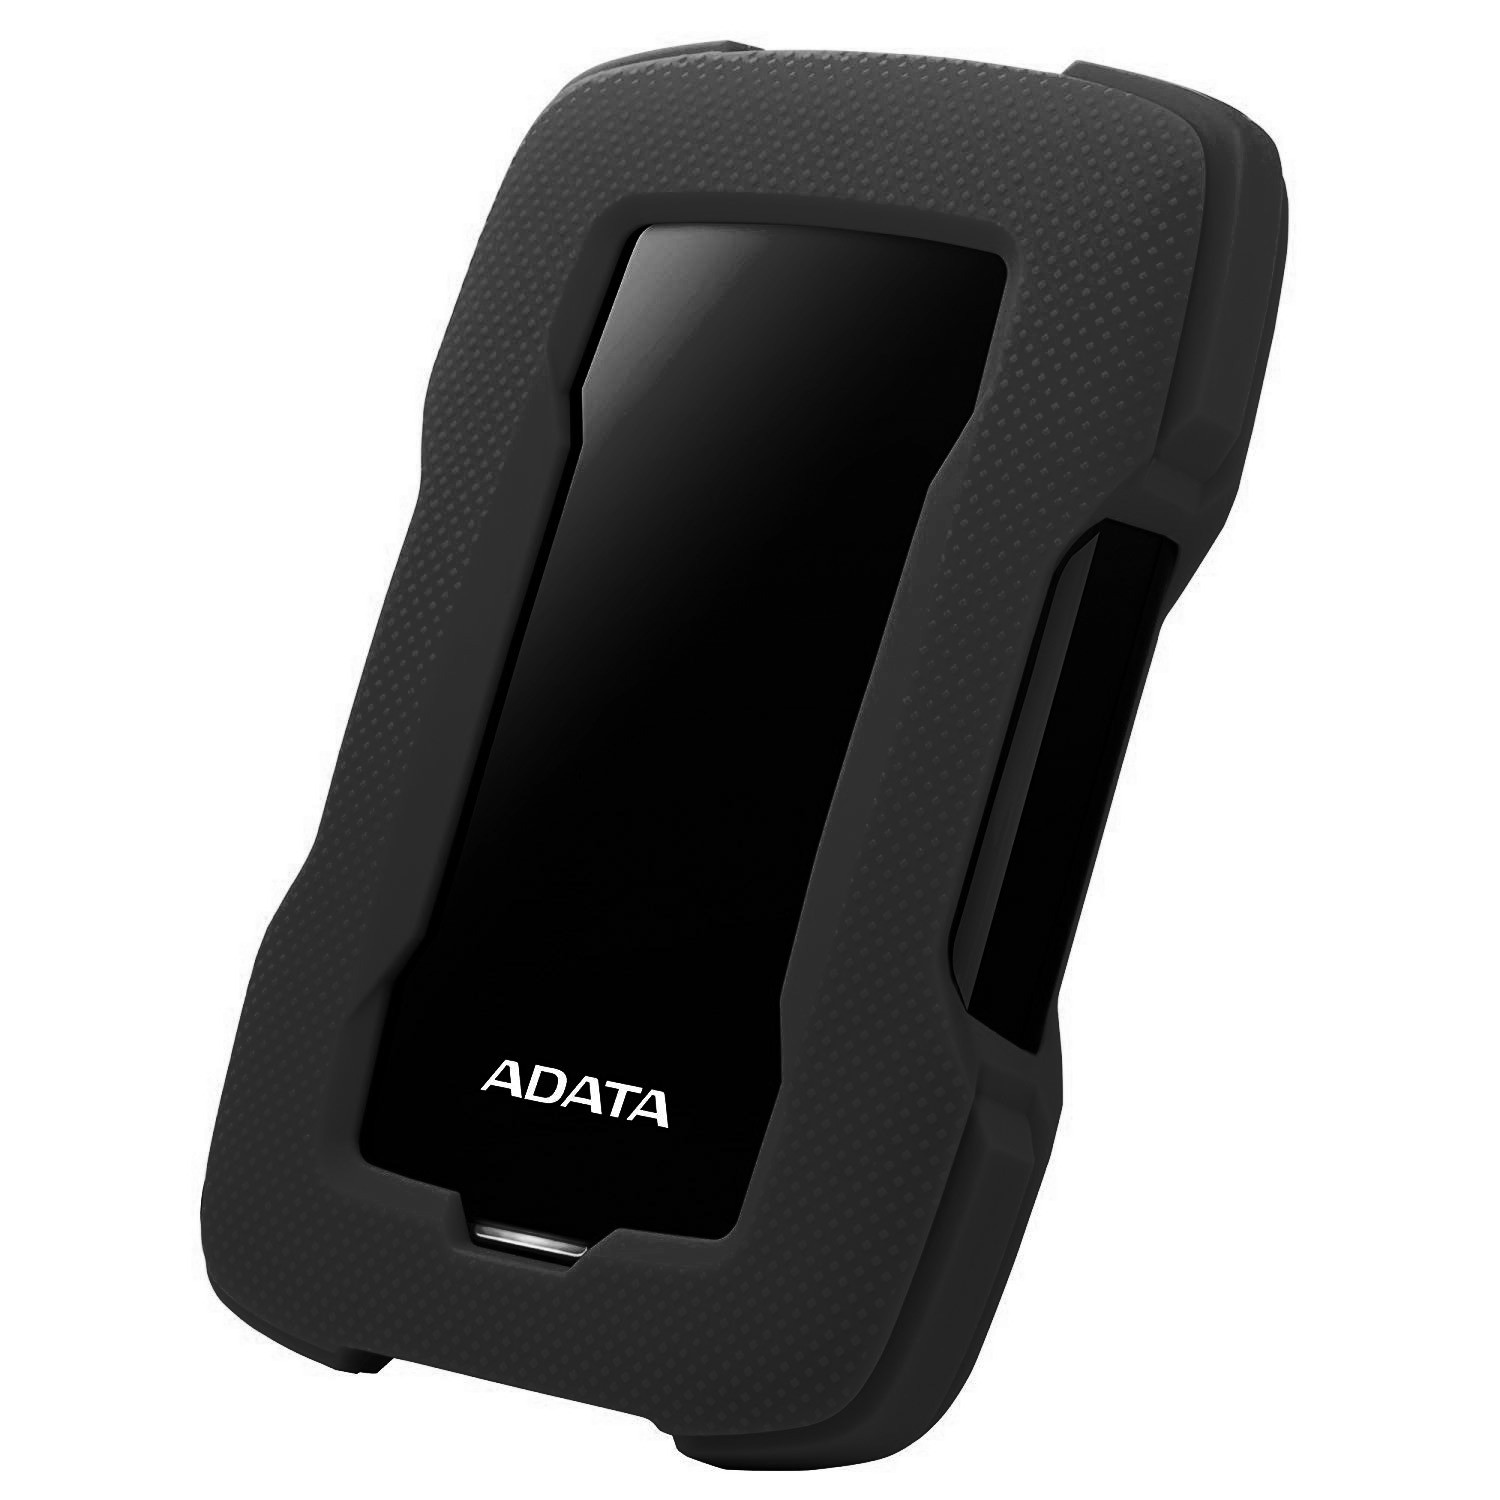 Adata Hd330 Series 1tb/1000gb Black+Black With Silicon Casing With Shock Absorption + G Shock Sensor Protection